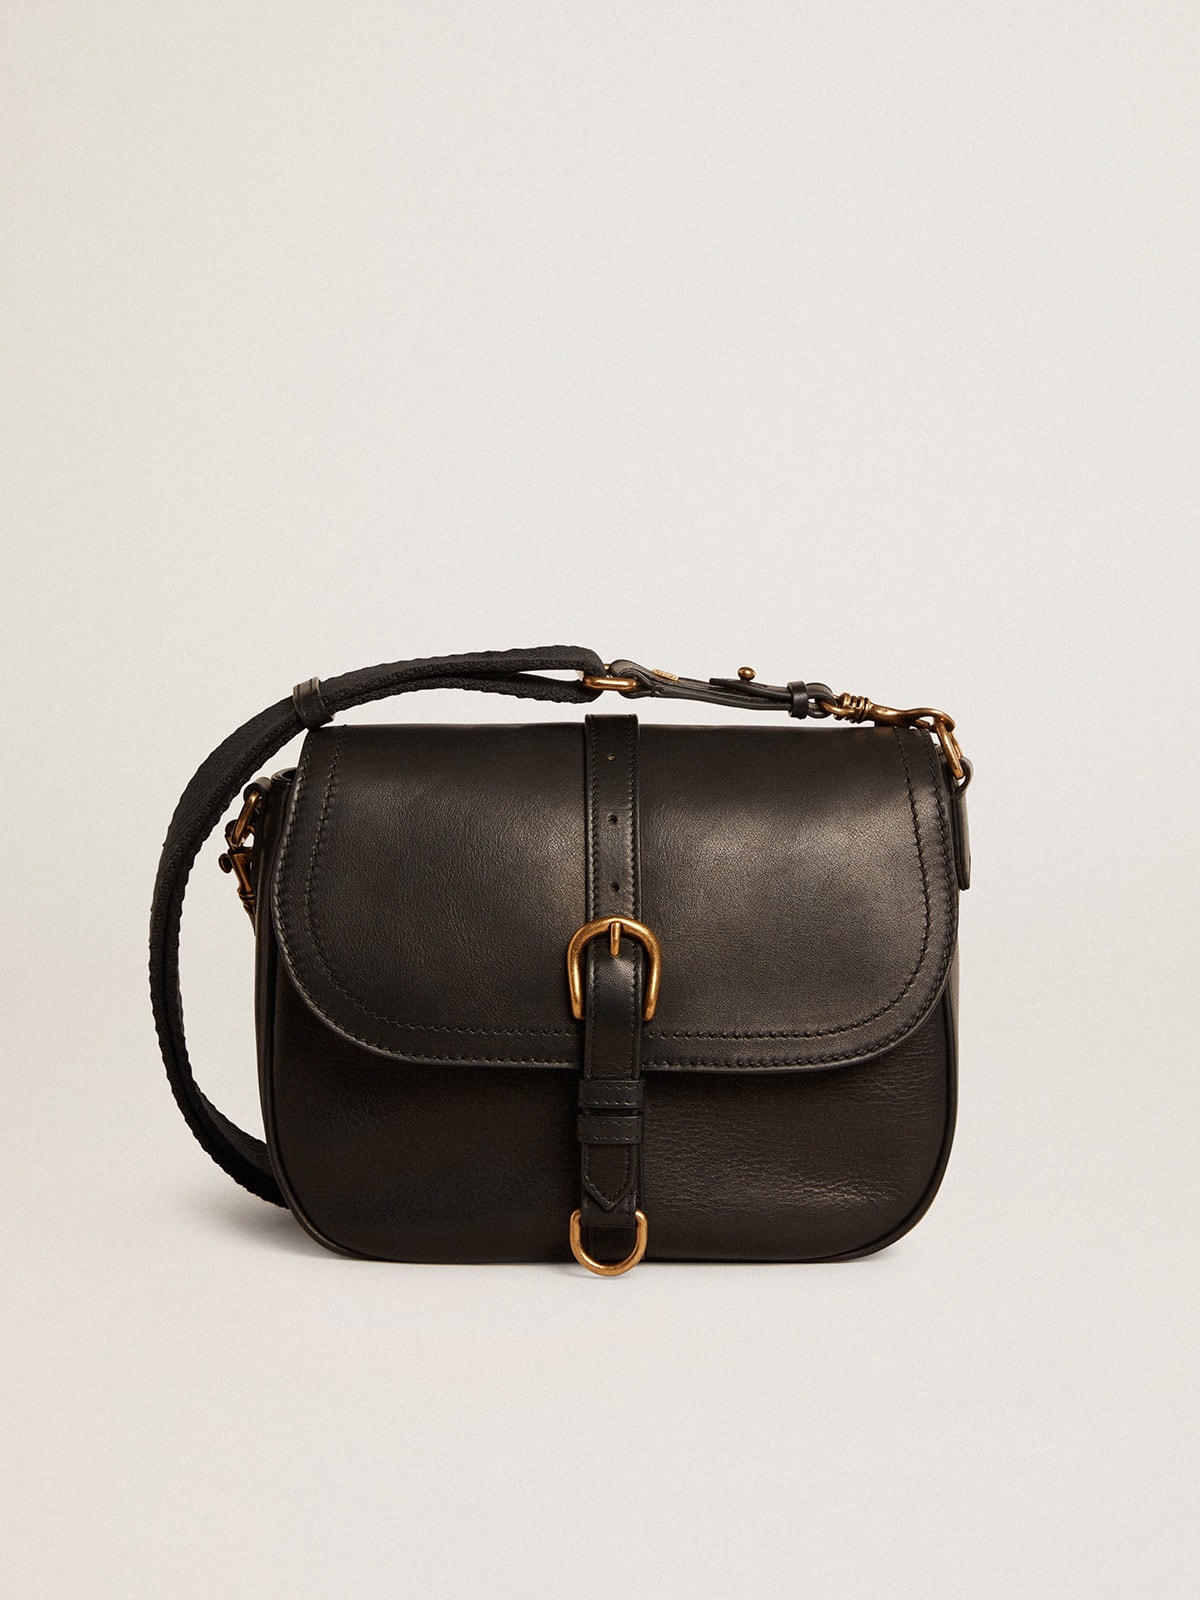 Golden Goose Medium Sally Bag In Black Leather With Buckle And Shoulder Strap GBP840.0